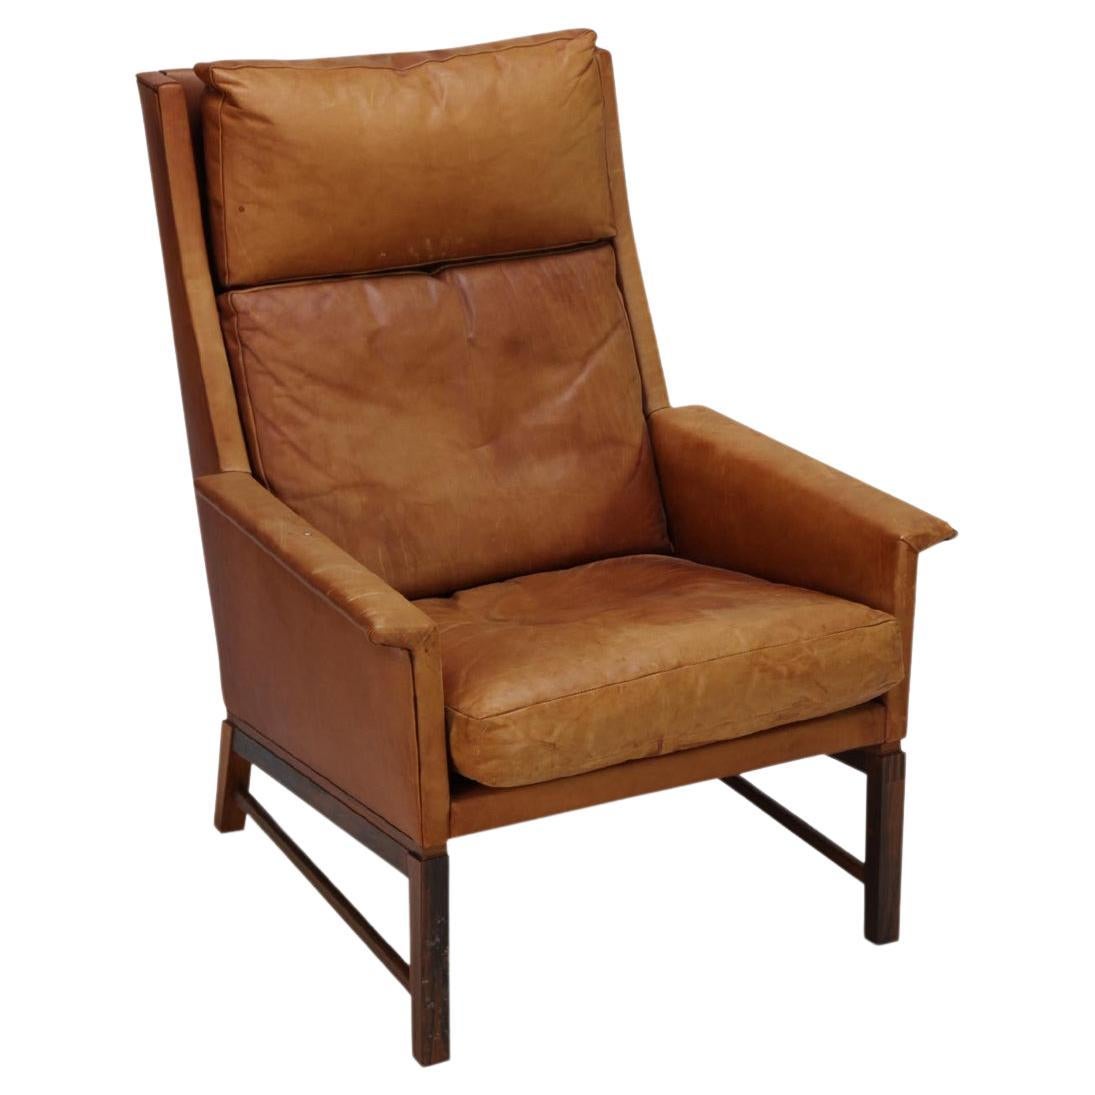 Highback Lounge Chair in Cognac Leather by Søborg Møbler